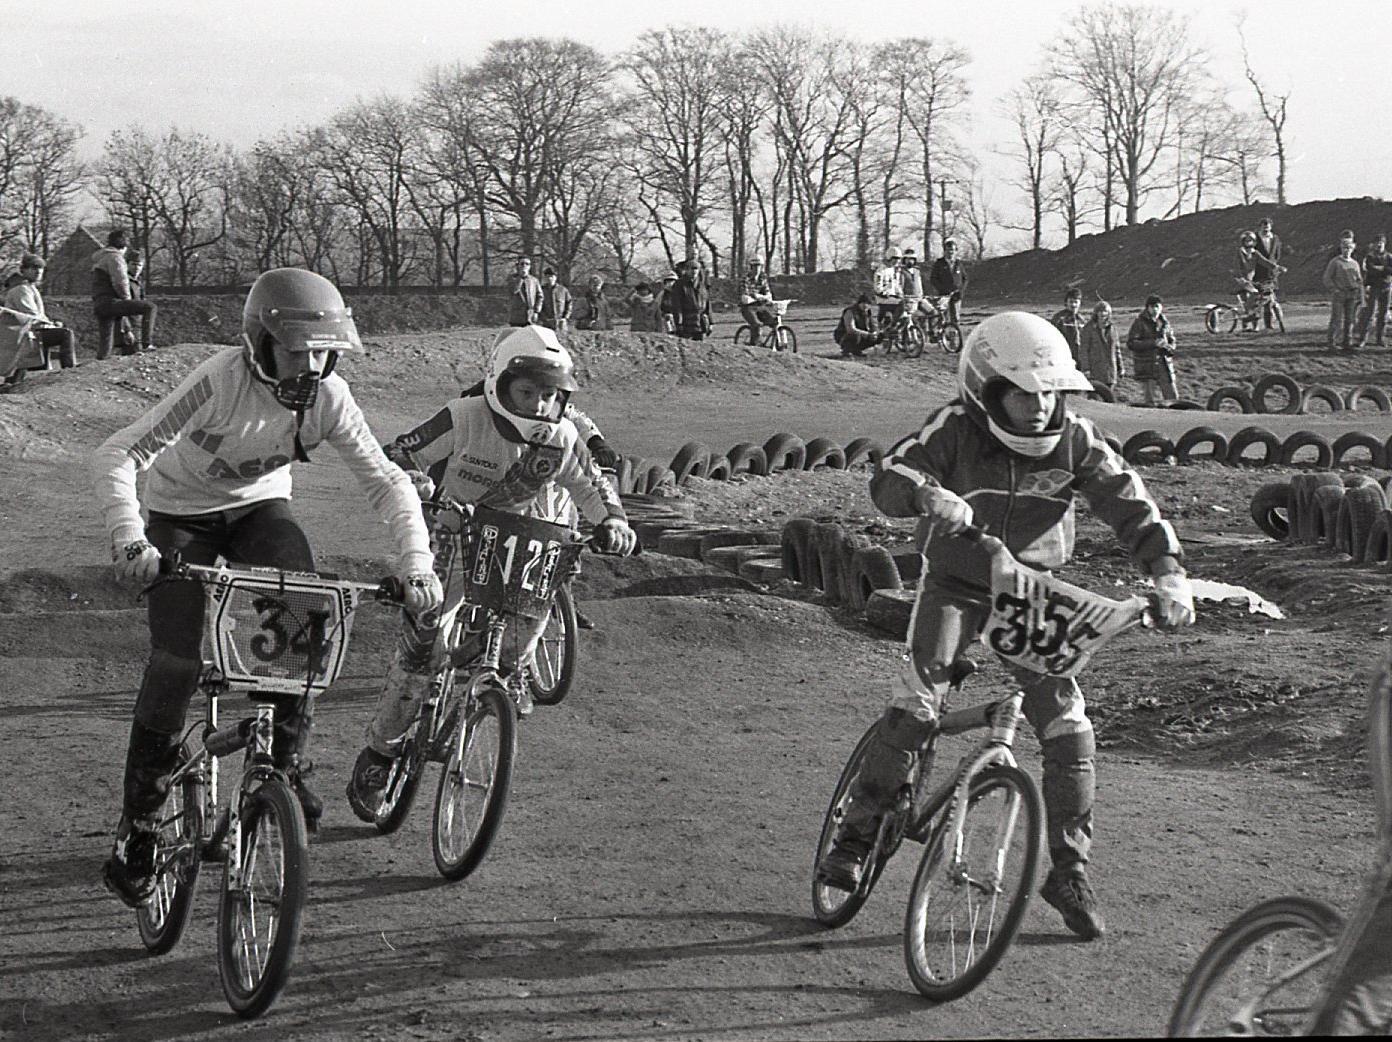 More than 250 riders served up a feast of thrills and spills at the Ribby Hall track, Kirkham, when the latest races in the North West BMX series were staged. Organising club Ribby Riders were delighted with the turn-out as some riders had travelled from as far away as Glasgow to take part